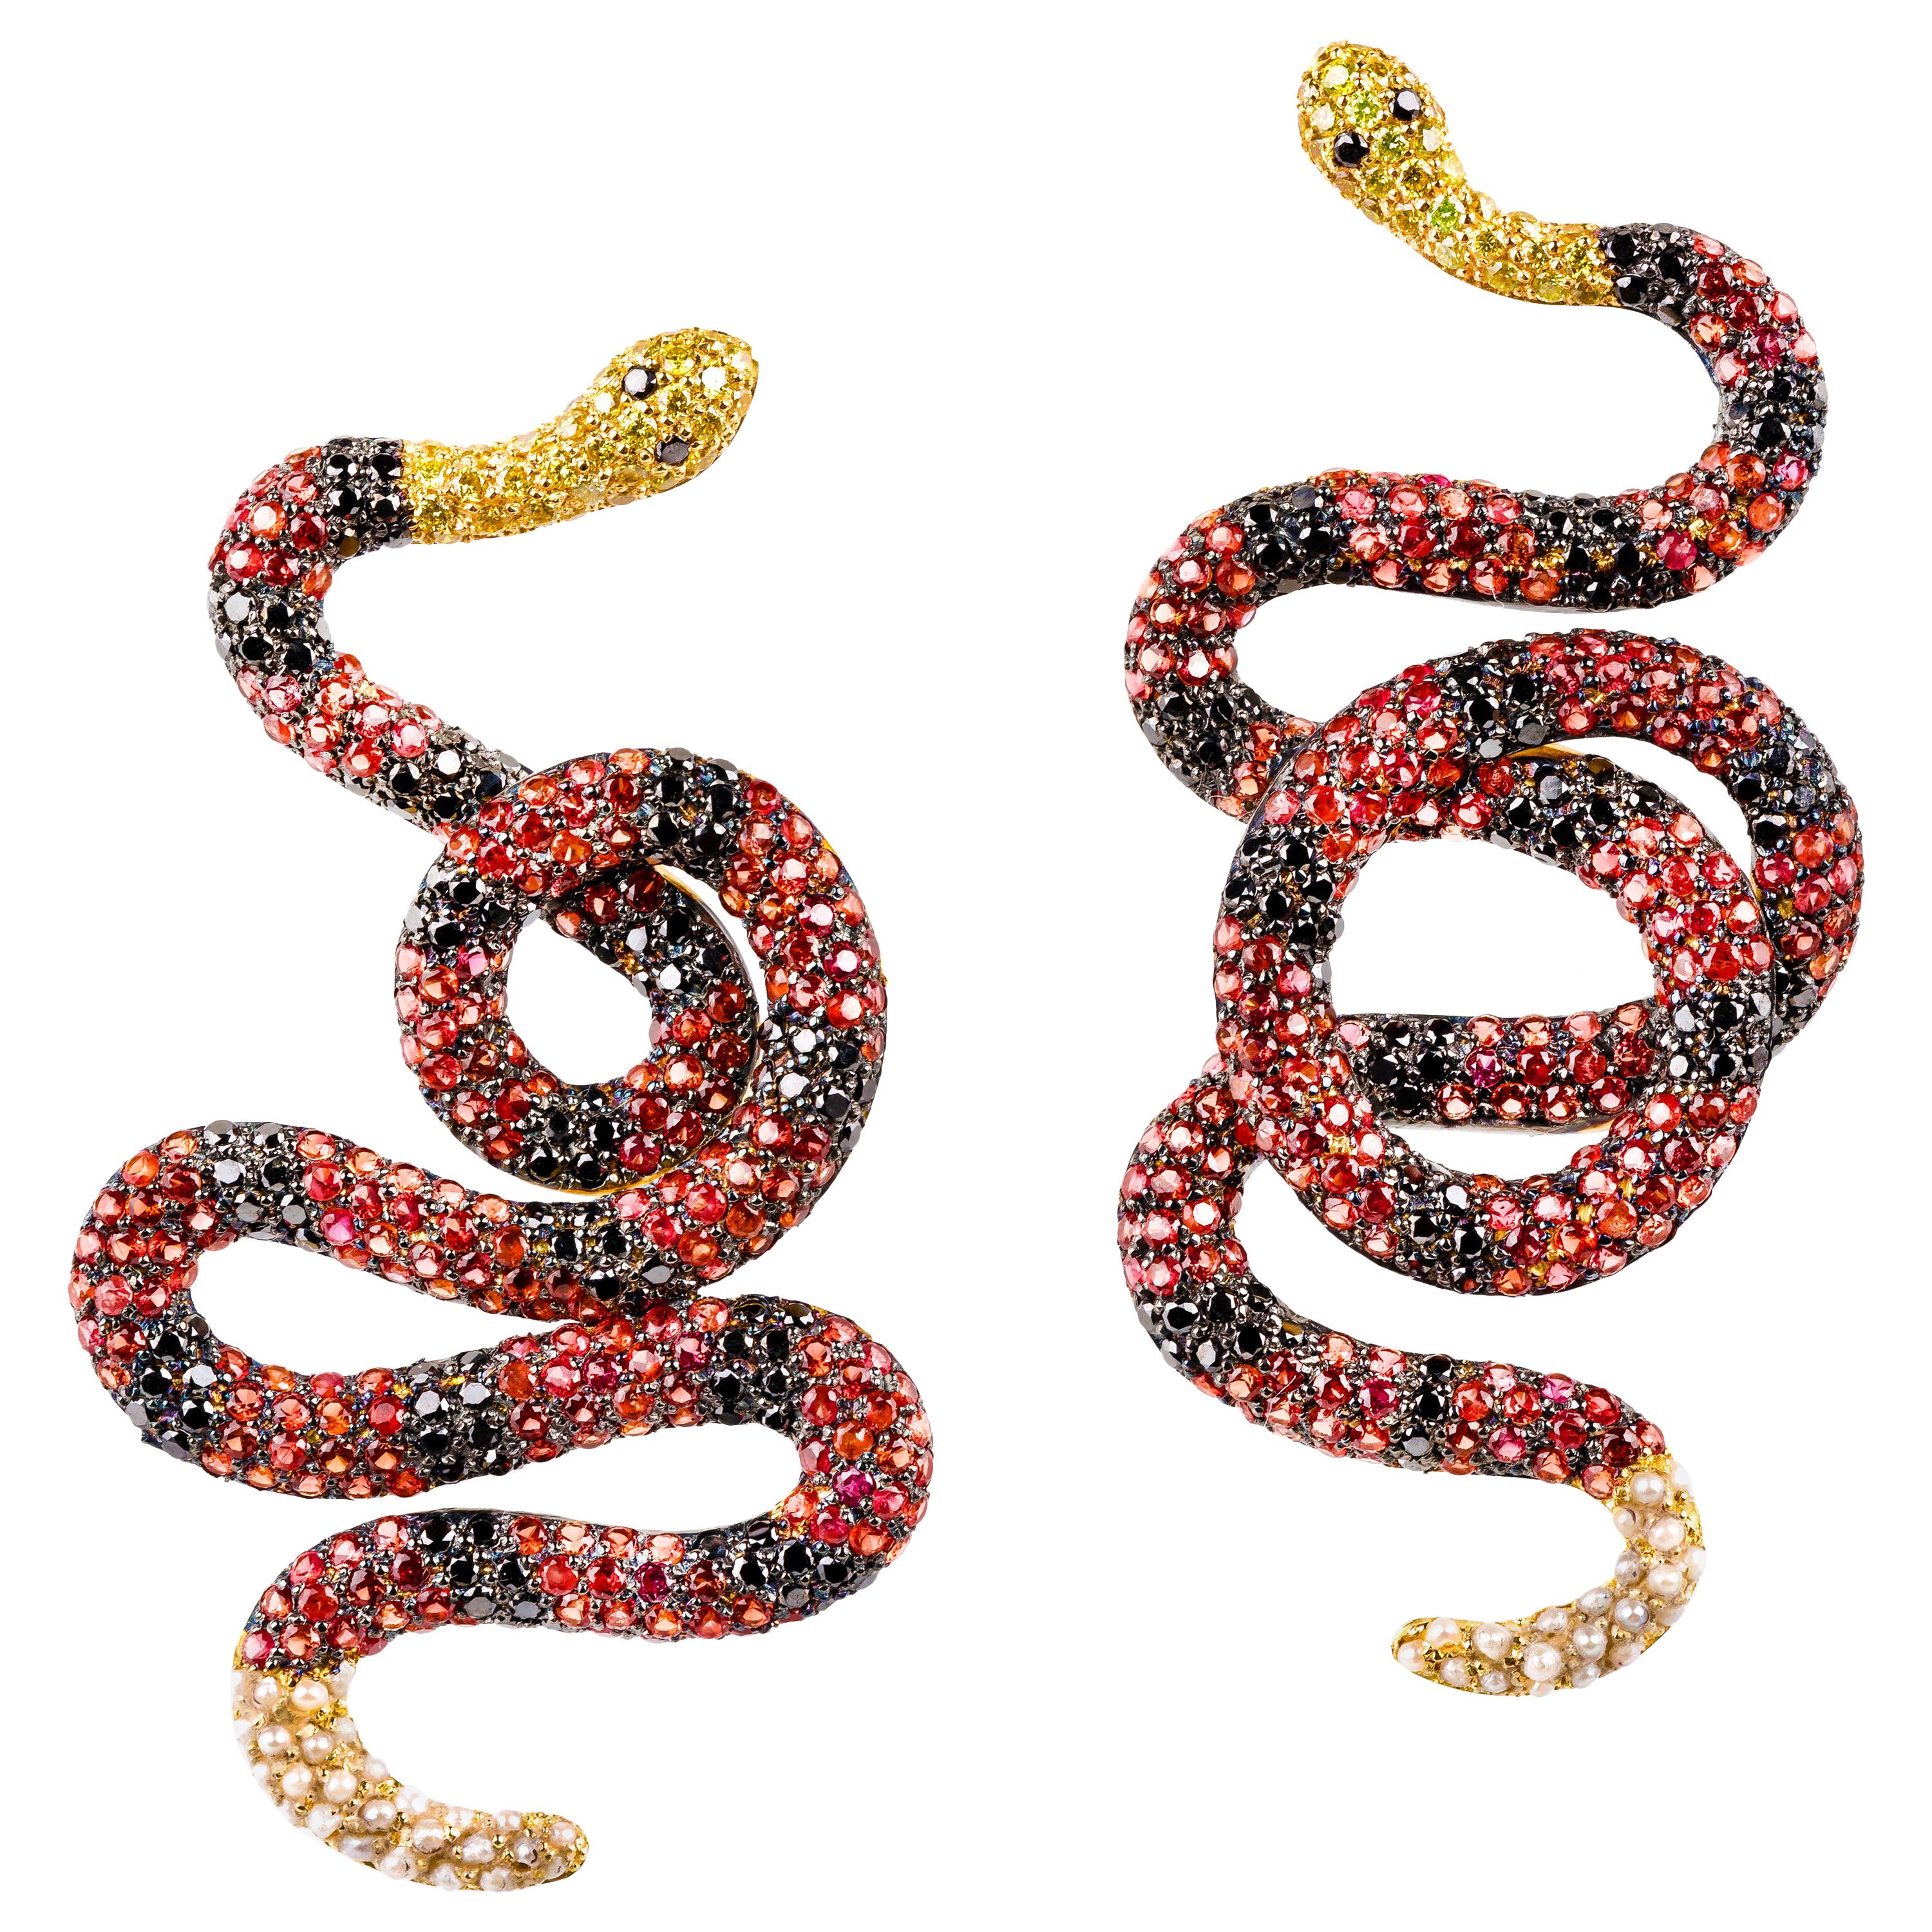 “Coral Snake" Drop Earrings in 19.2 Karat Yellow Gold, Diamonds and Sapphires